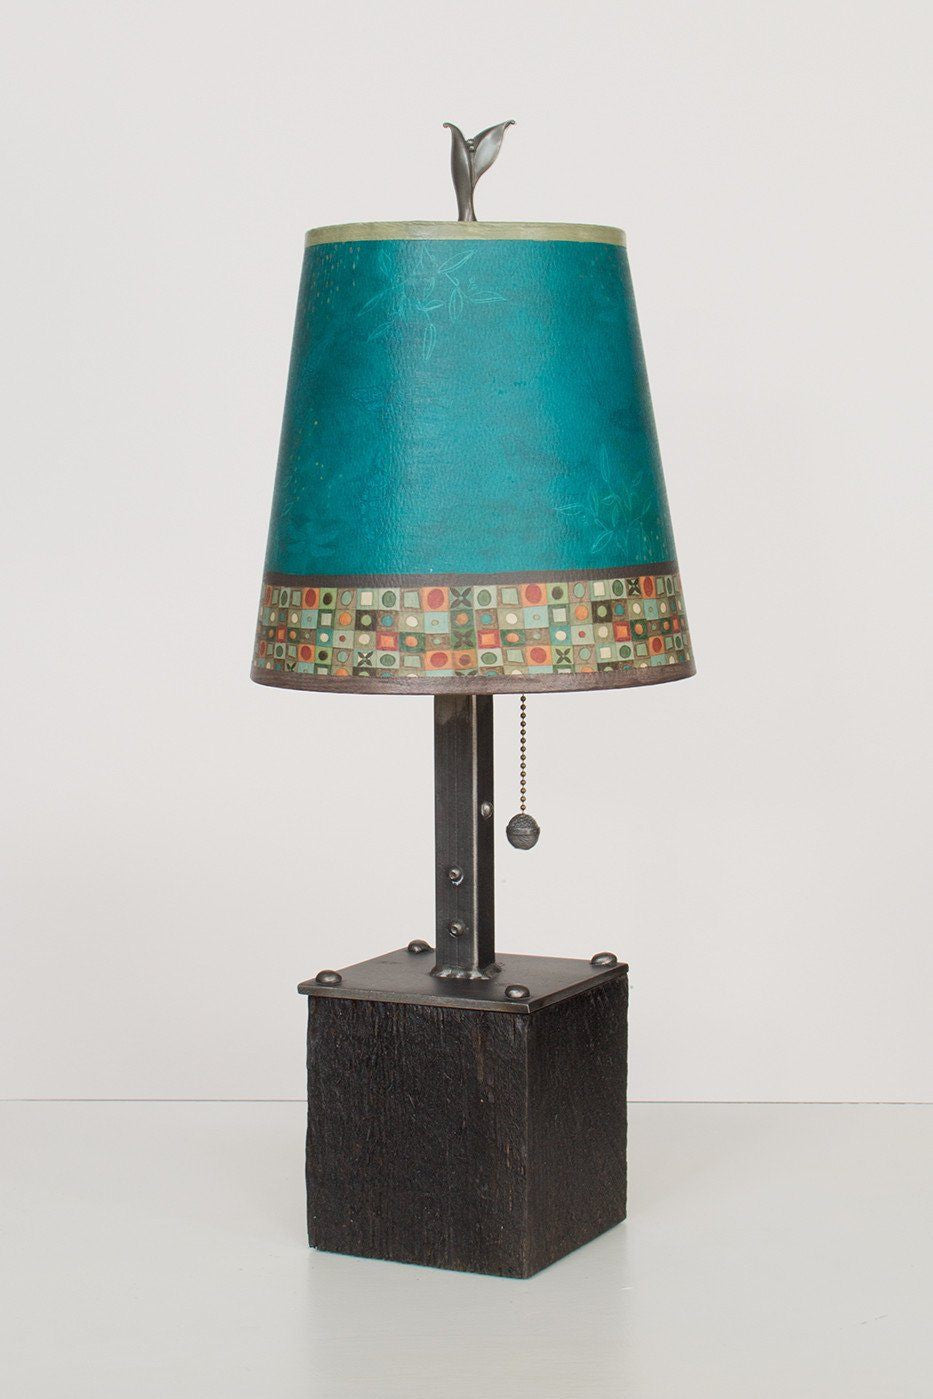 Janna Ugone & Co Table Lamps Steel Table Lamp on Reclaimed Wood with Small Drum Shade in Jade Mosaic